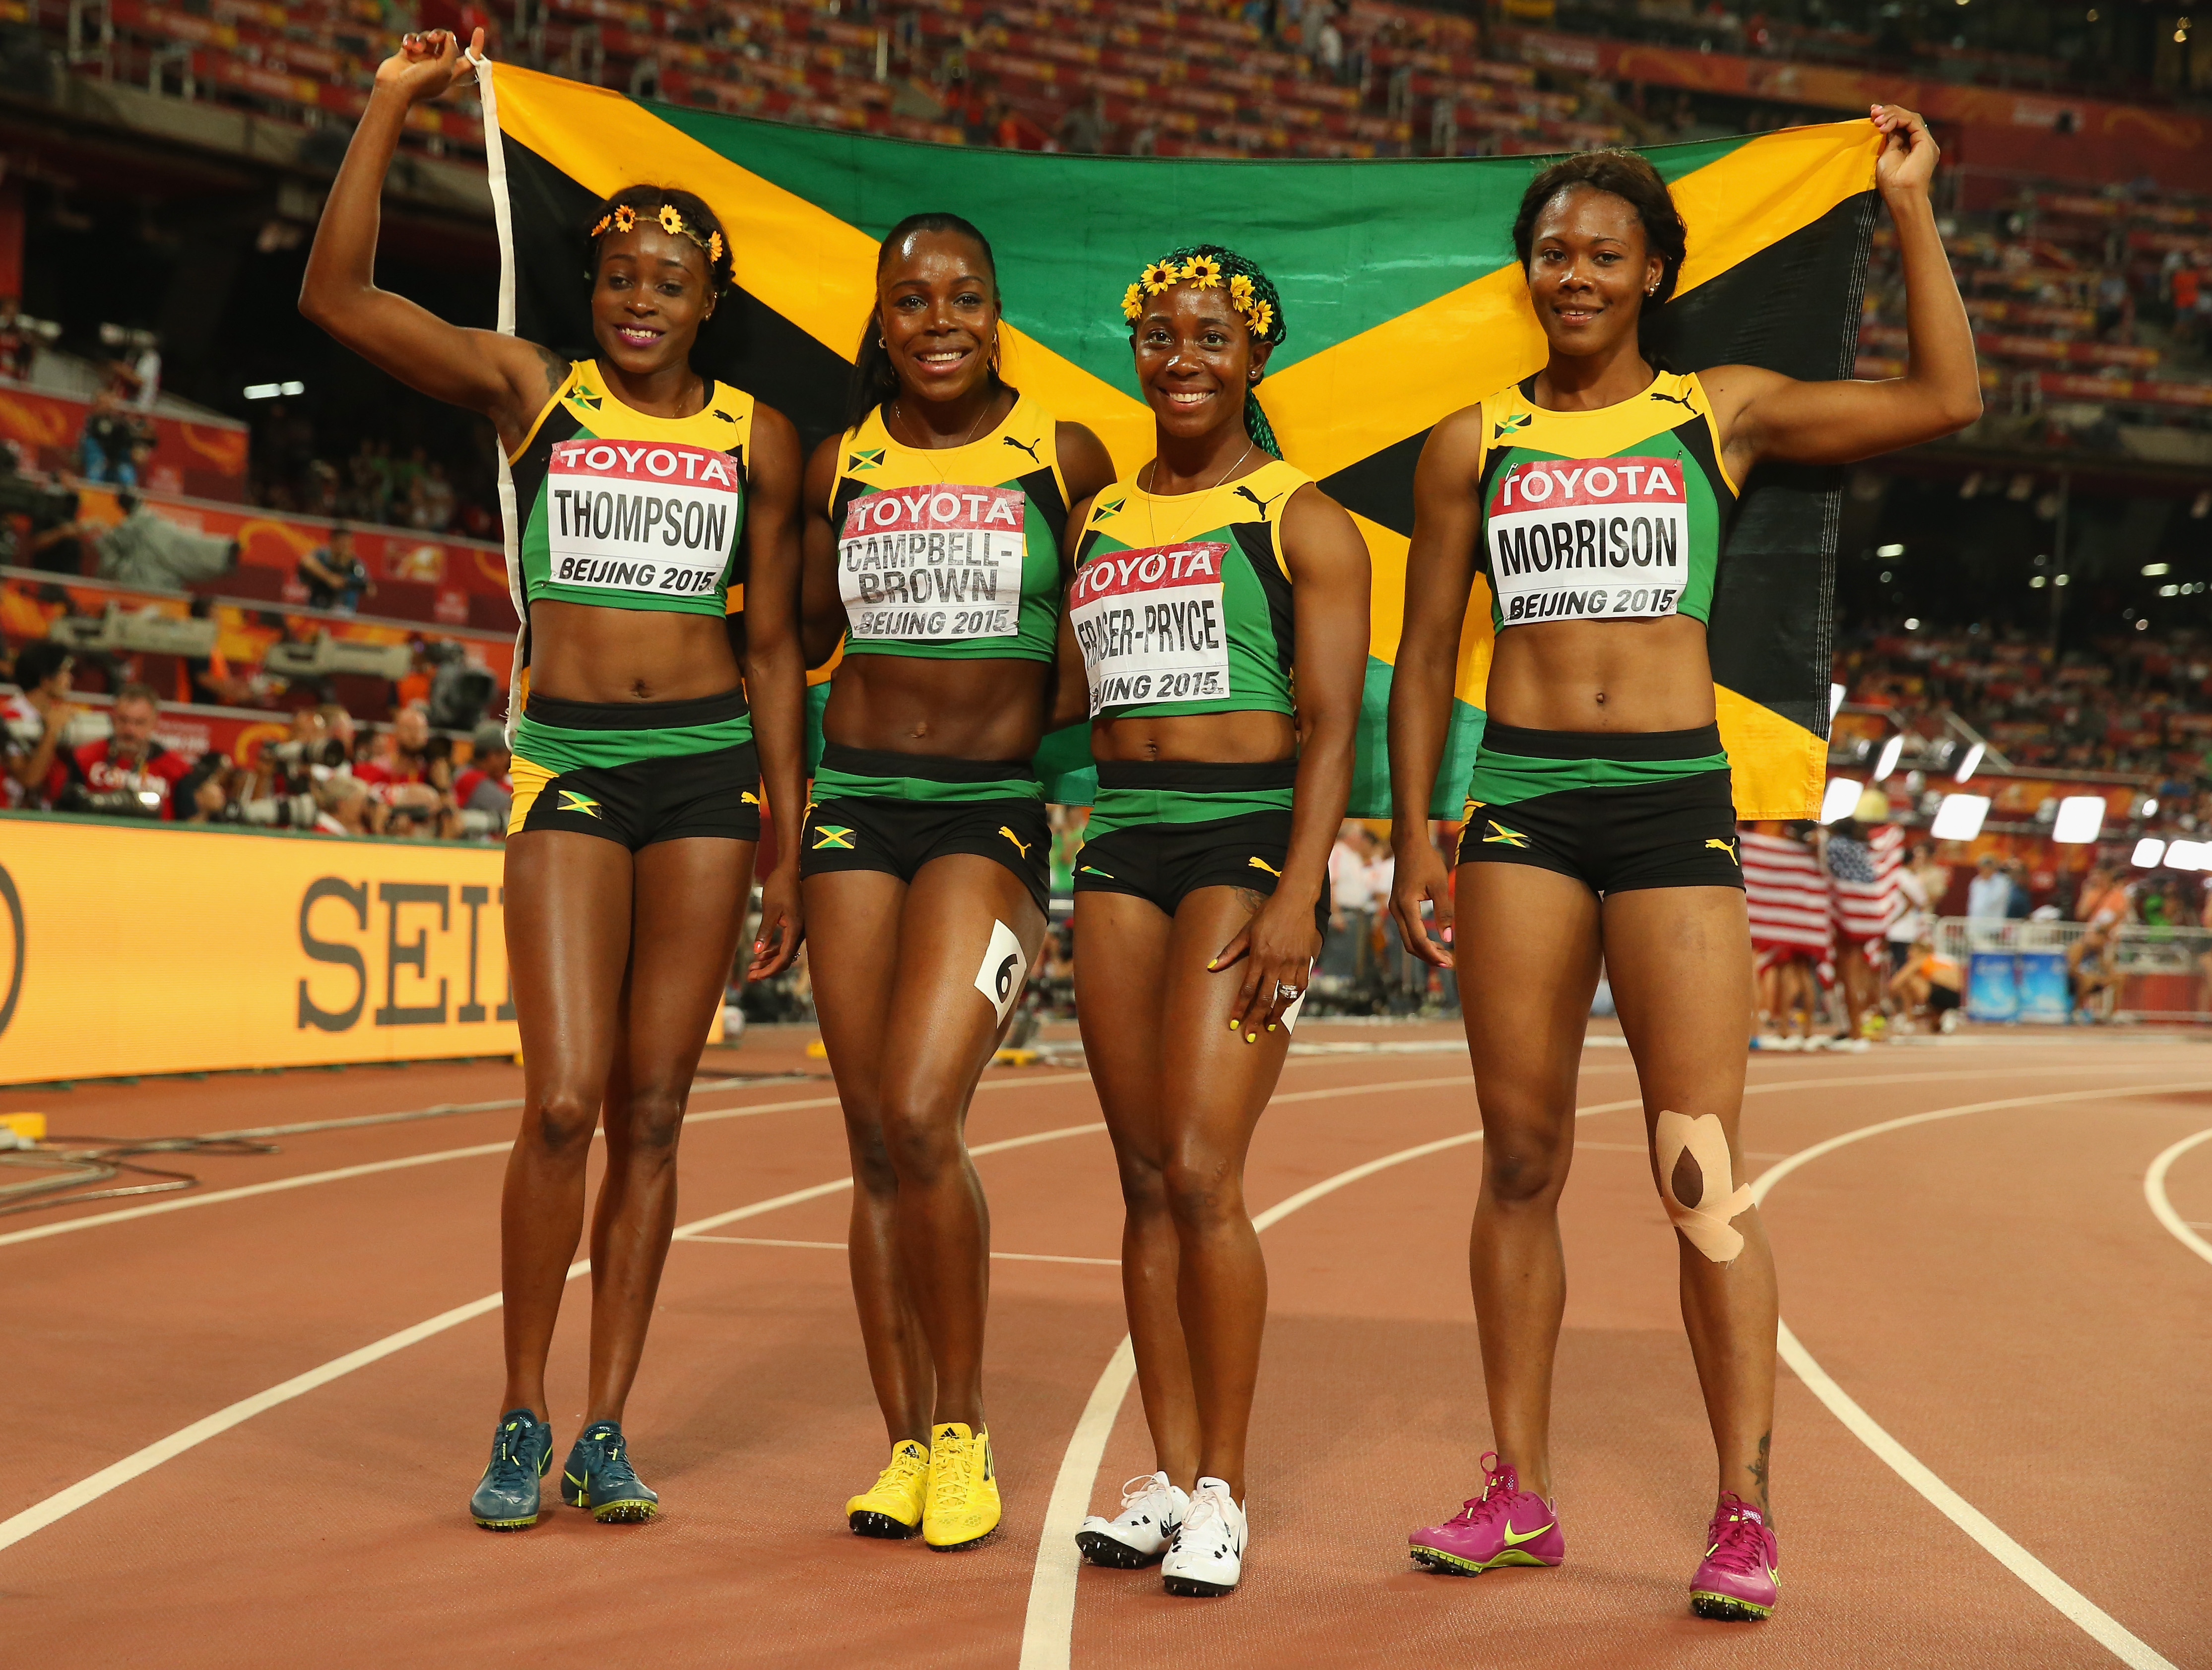 Campbell-Brown happy to help keep sprint tradition alive